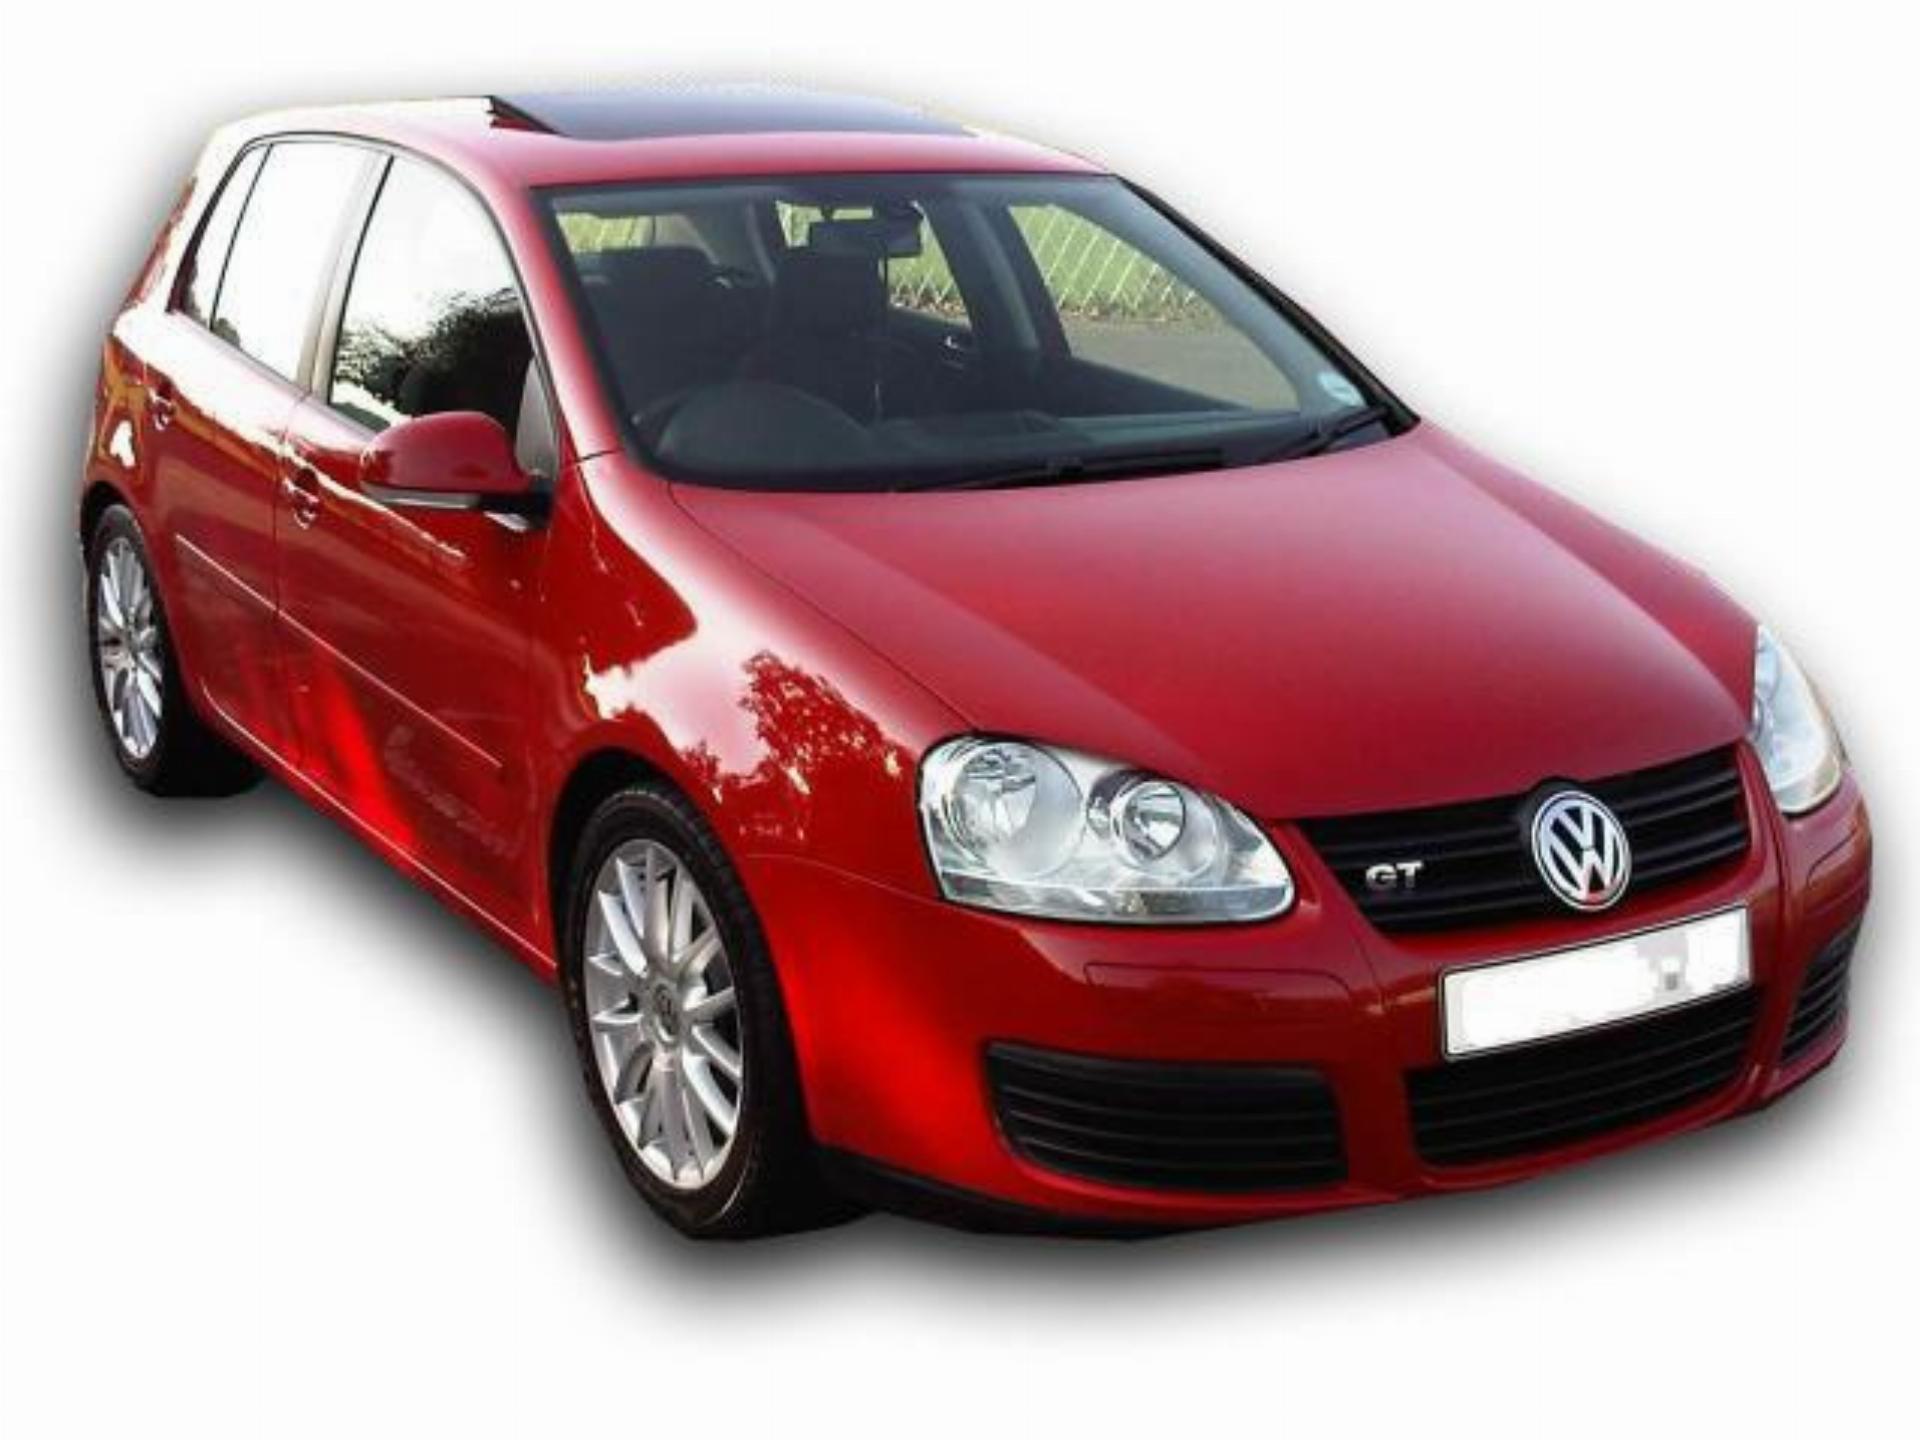 Used Volkswagen Golf 5 1.4 Tsi 2008 on auction PV1000464